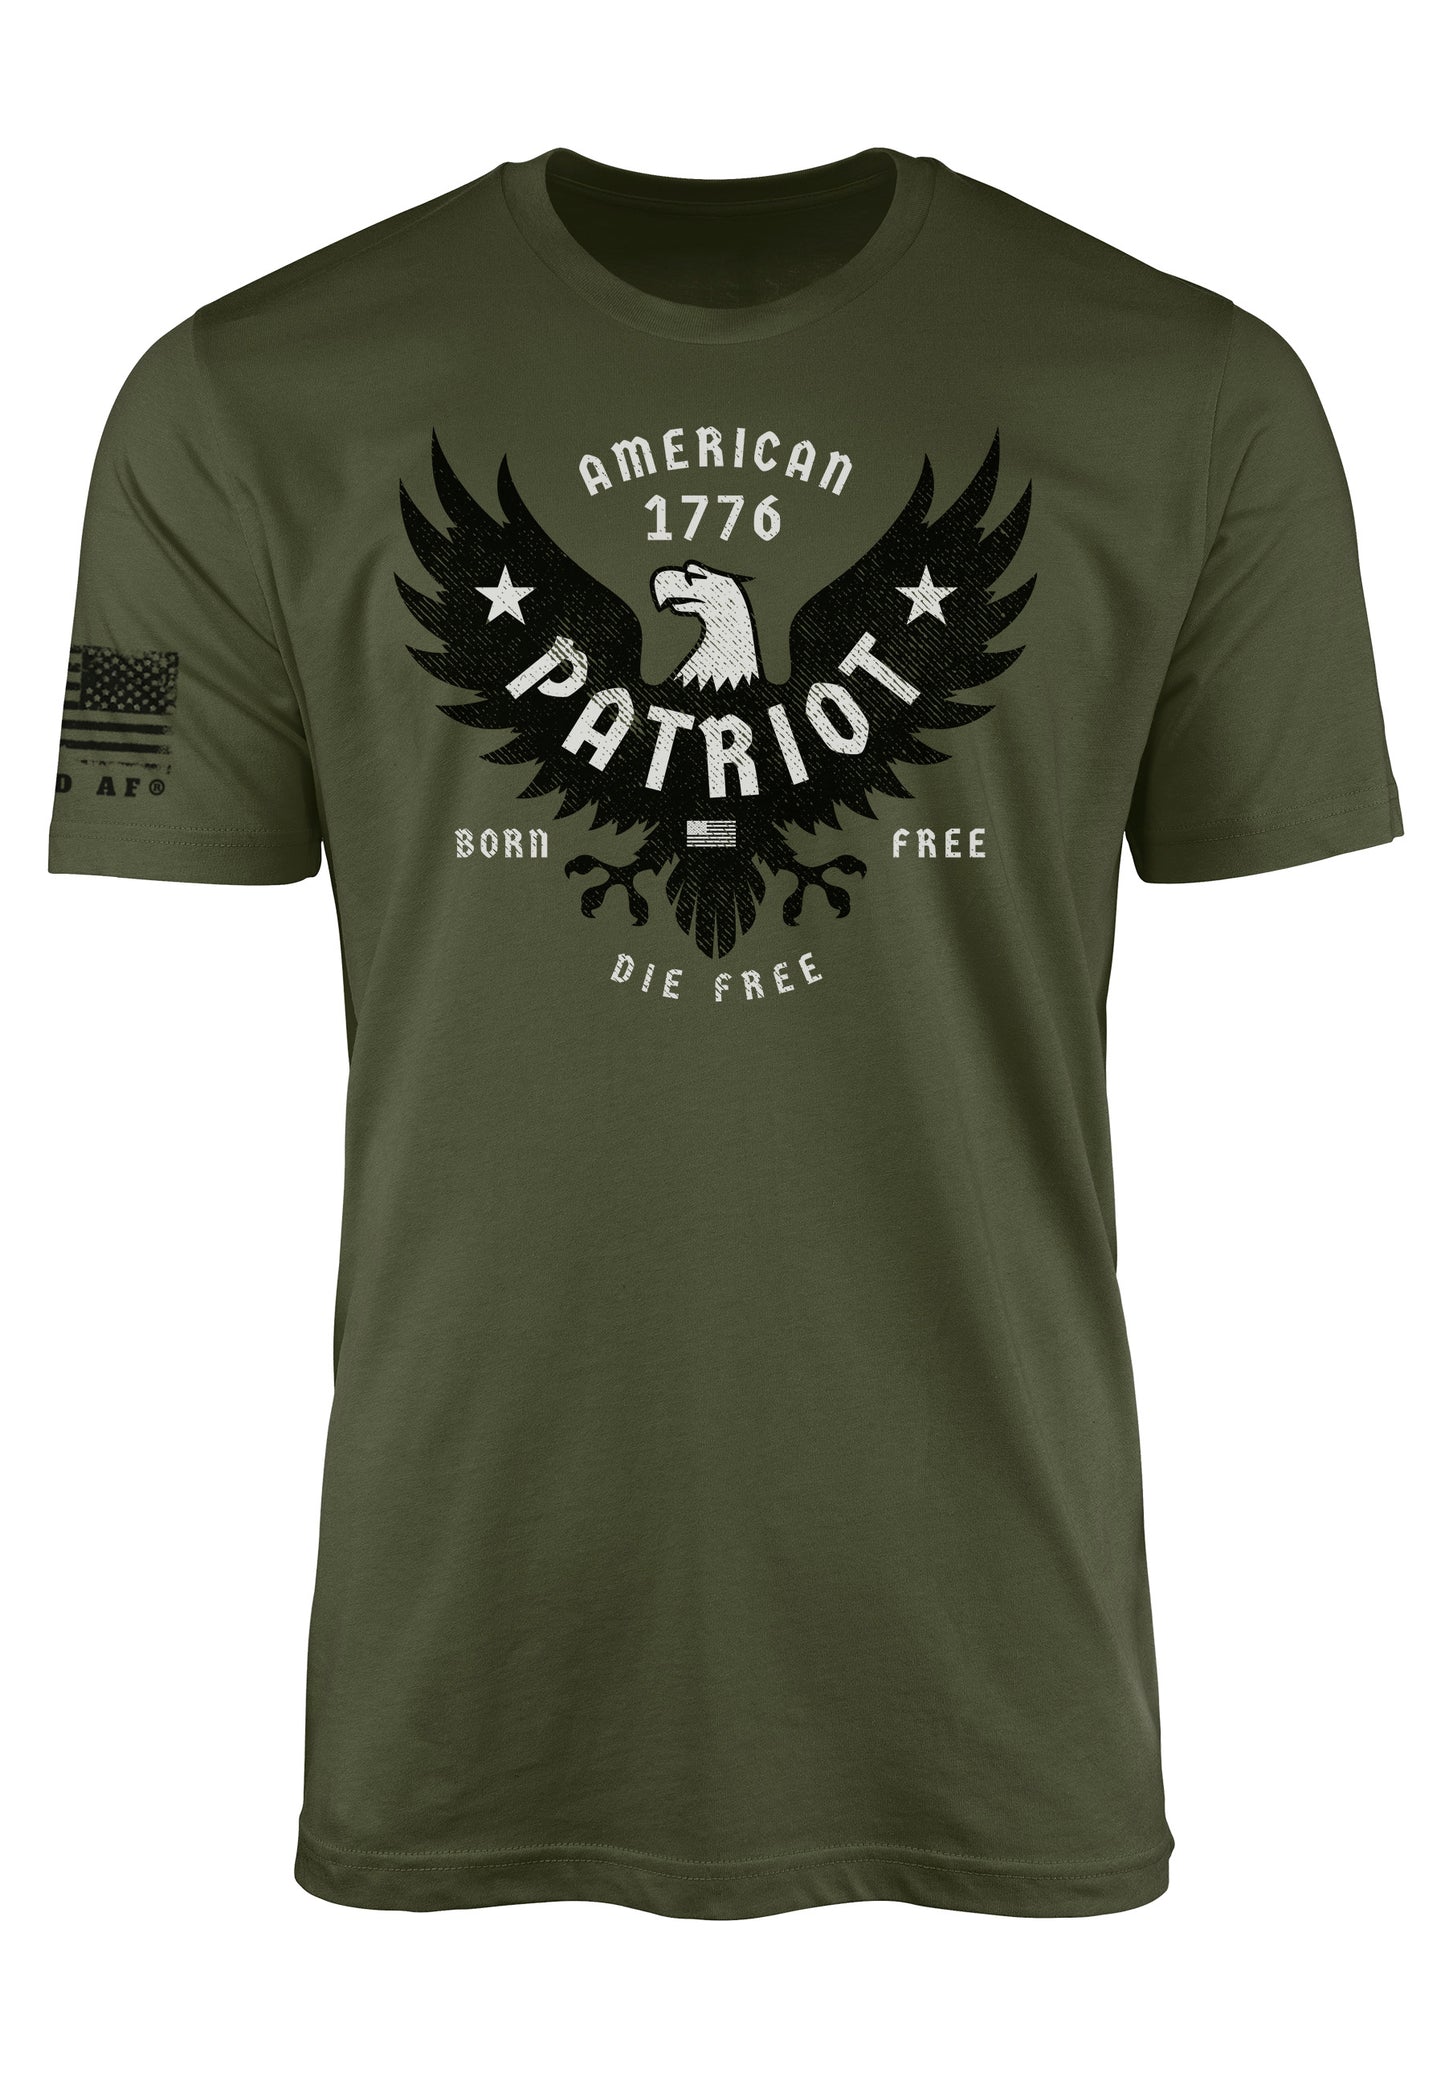 American Patriot t-shirt design on front of tee shirt